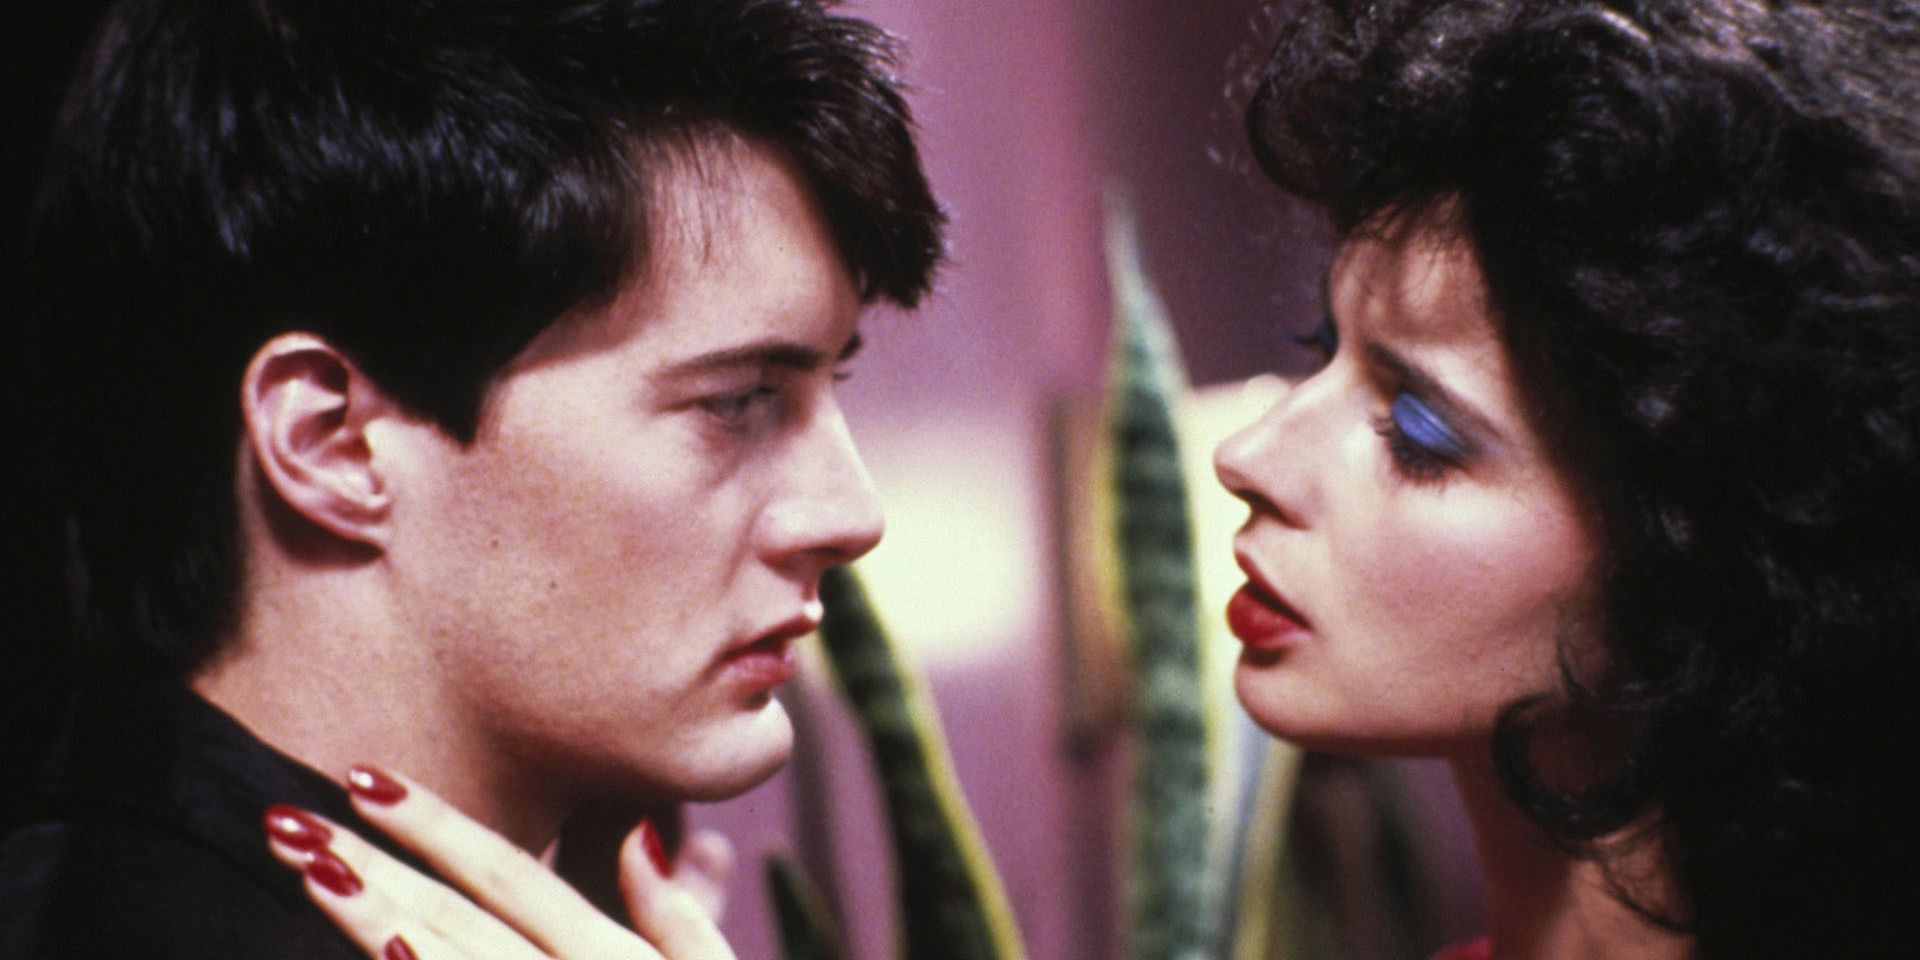 Dorothy and Jeffrey stare at each other in Blue Velvet